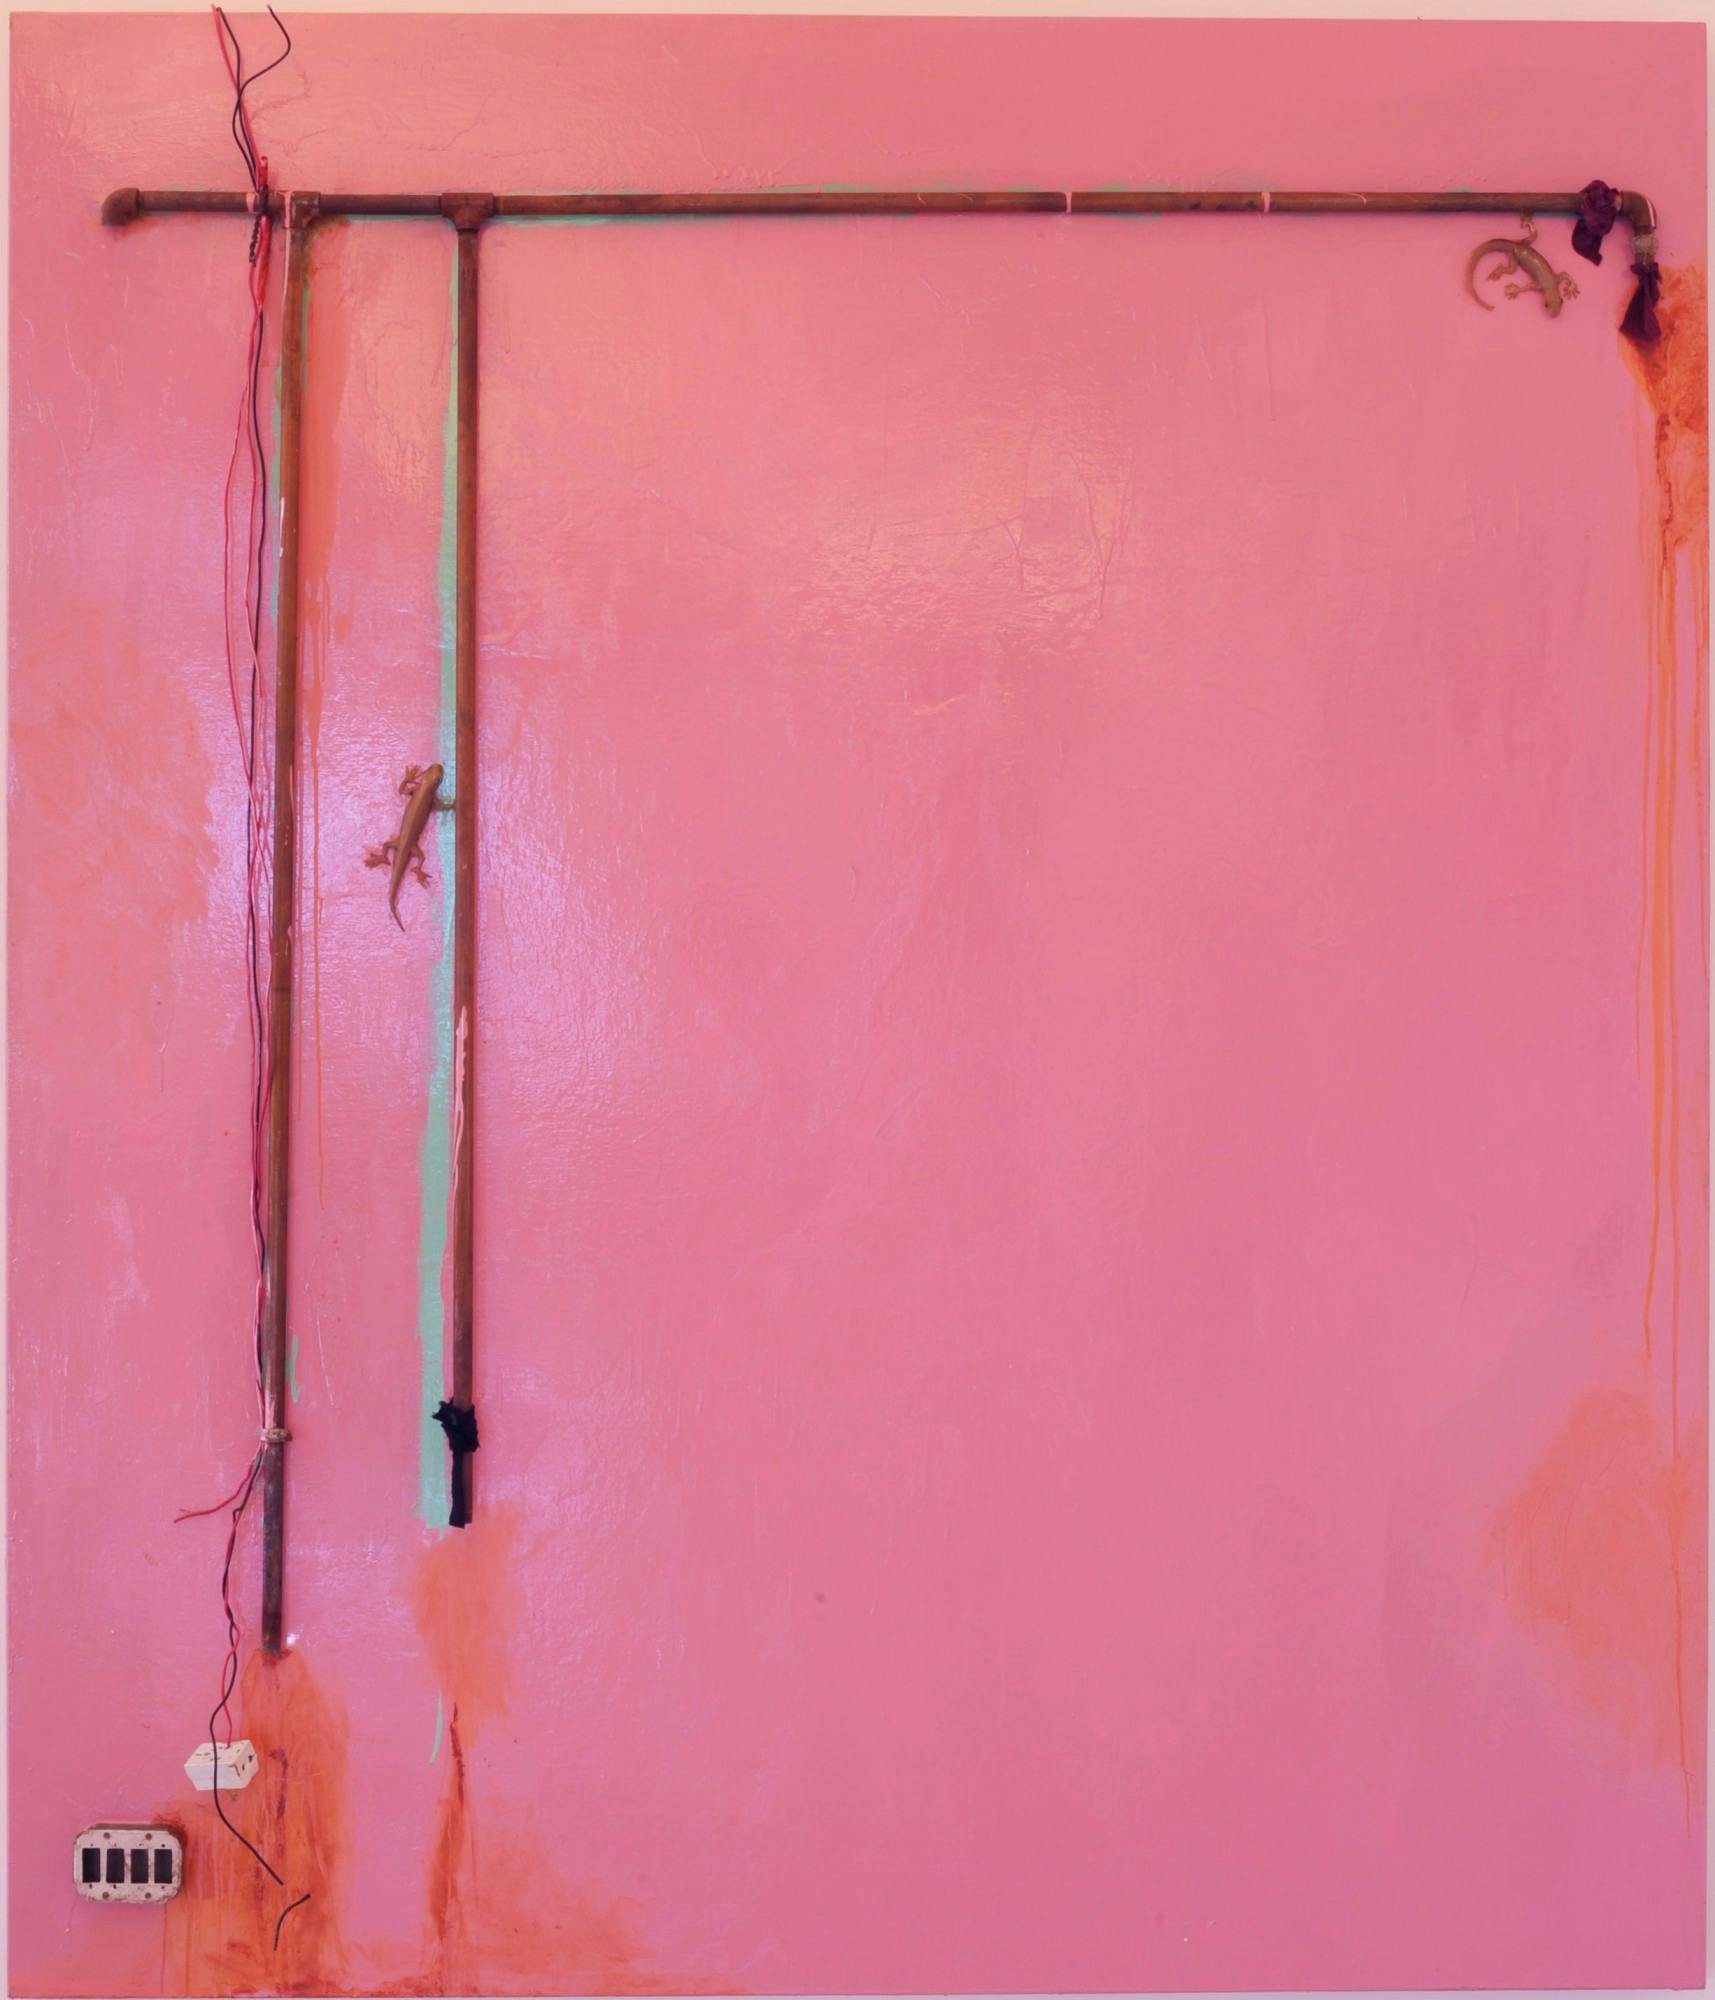 Memory of a Pink 213 cm x 182 cm